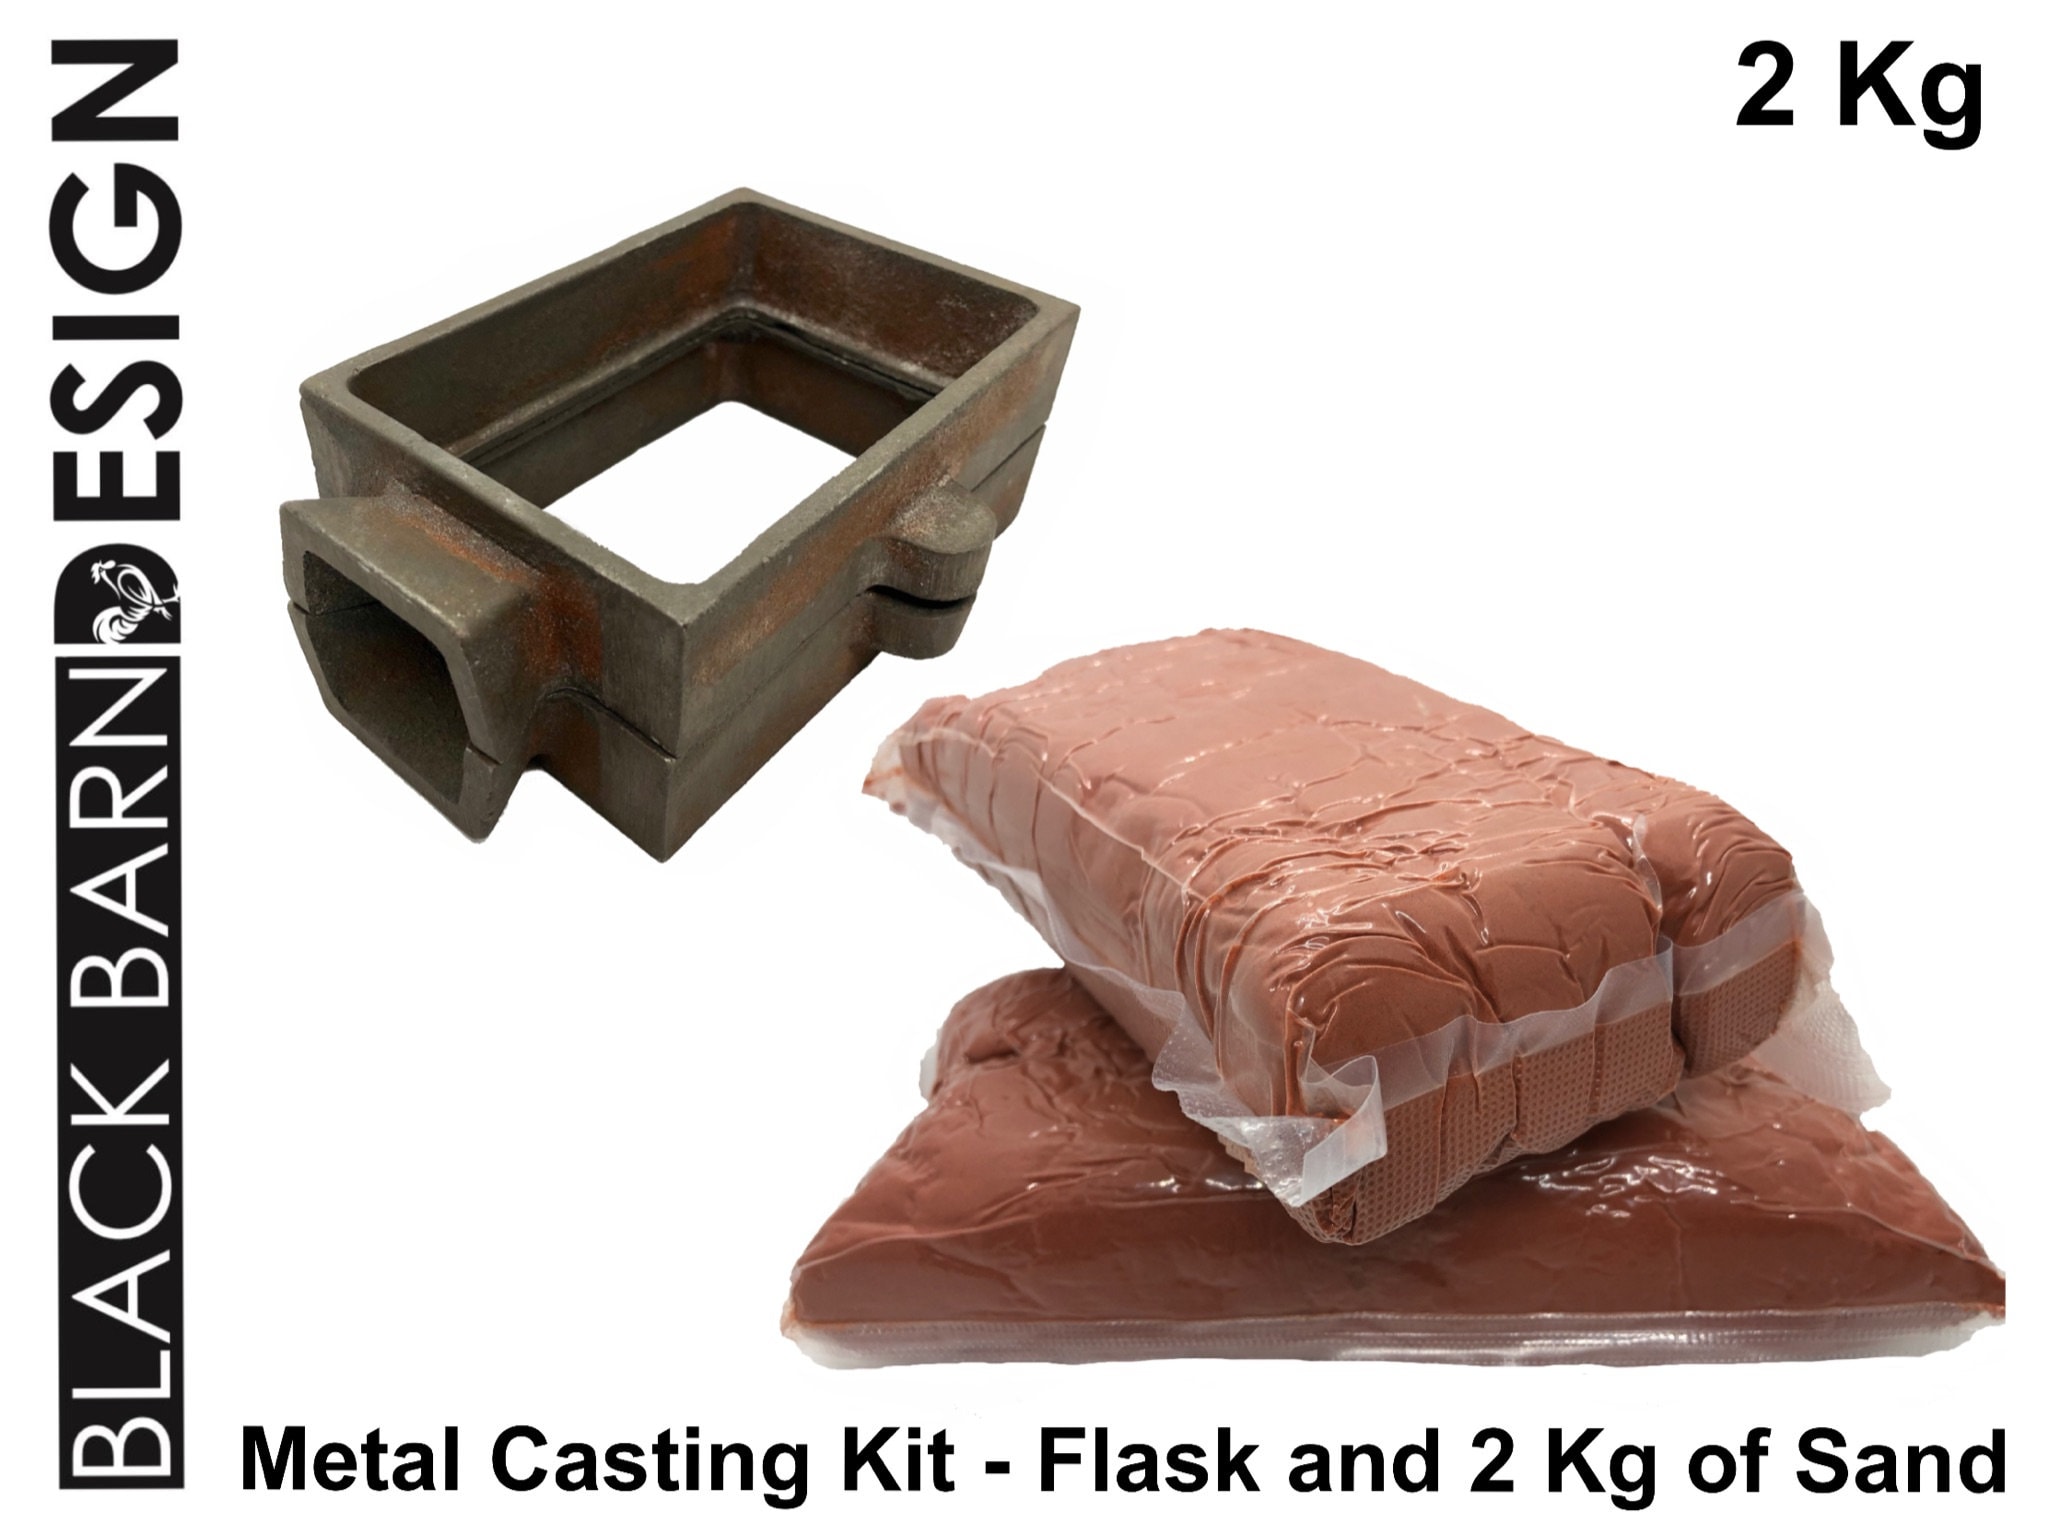 Sand Casting Kit 2 Kg & Flask for Metal Casting delft Style Gold Silver  Bronze -  Finland